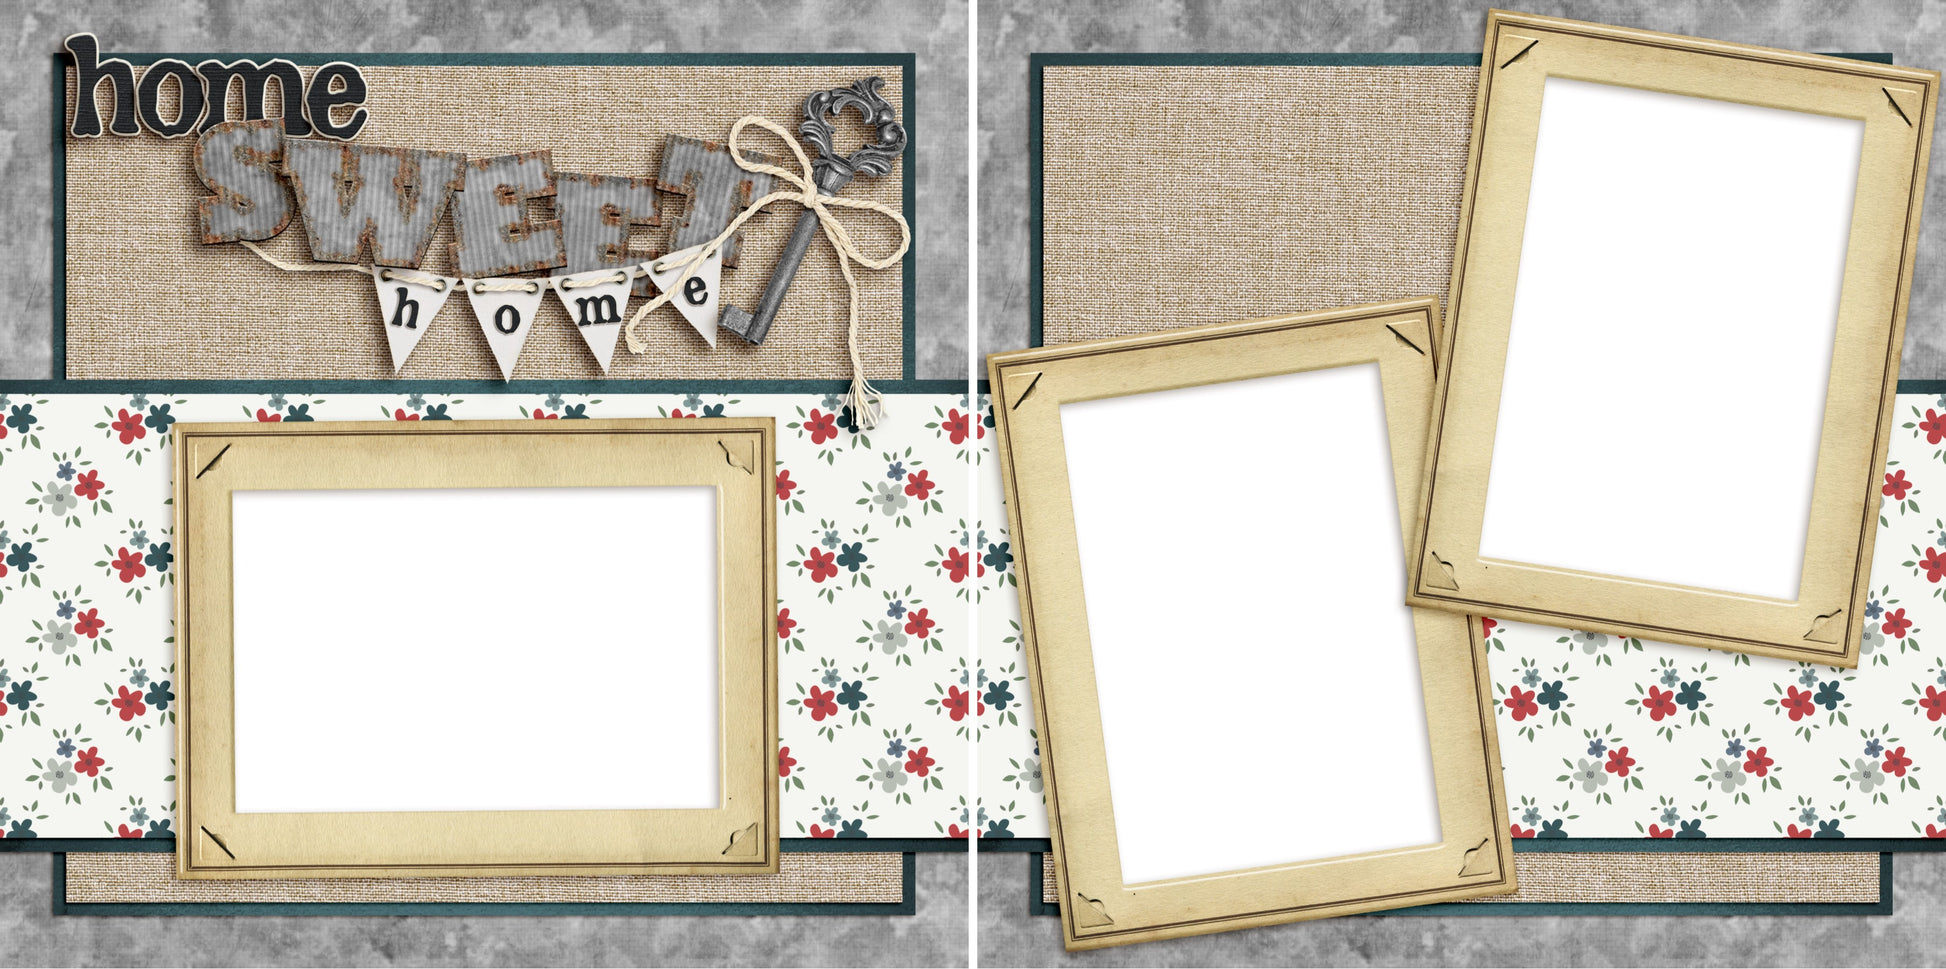 Home Sweet Home - Digital Scrapbook Pages - INSTANT DOWNLOAD - EZscrapbooks Scrapbook Layouts Family, Heritage